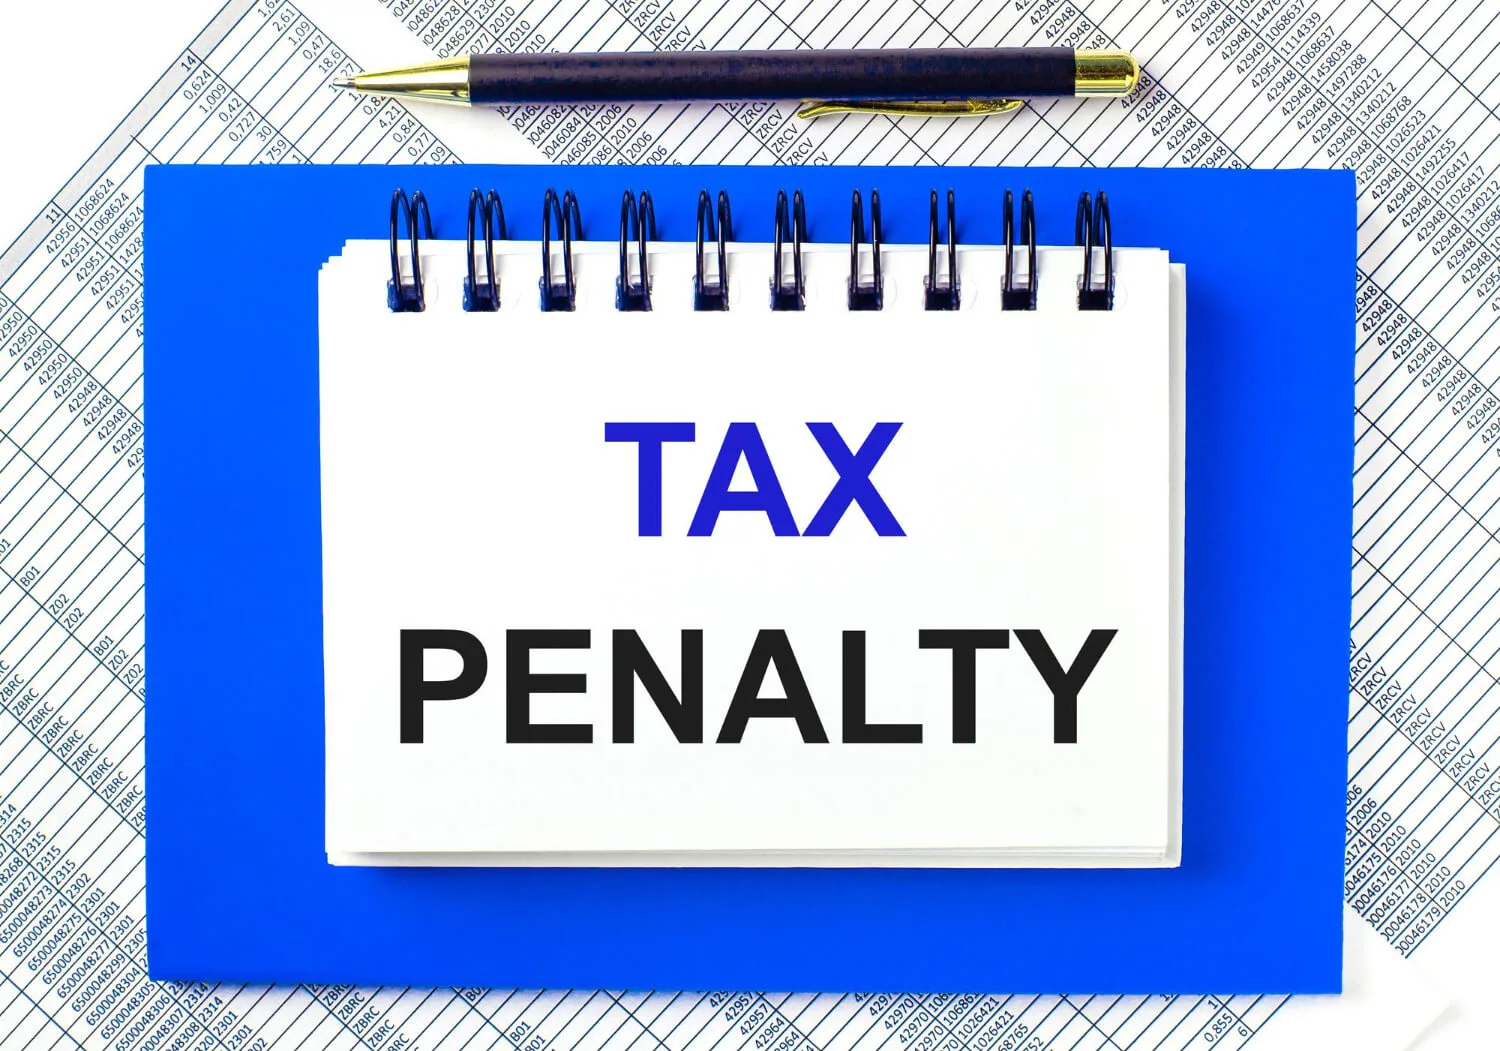 What is Tax Penalty Notice?